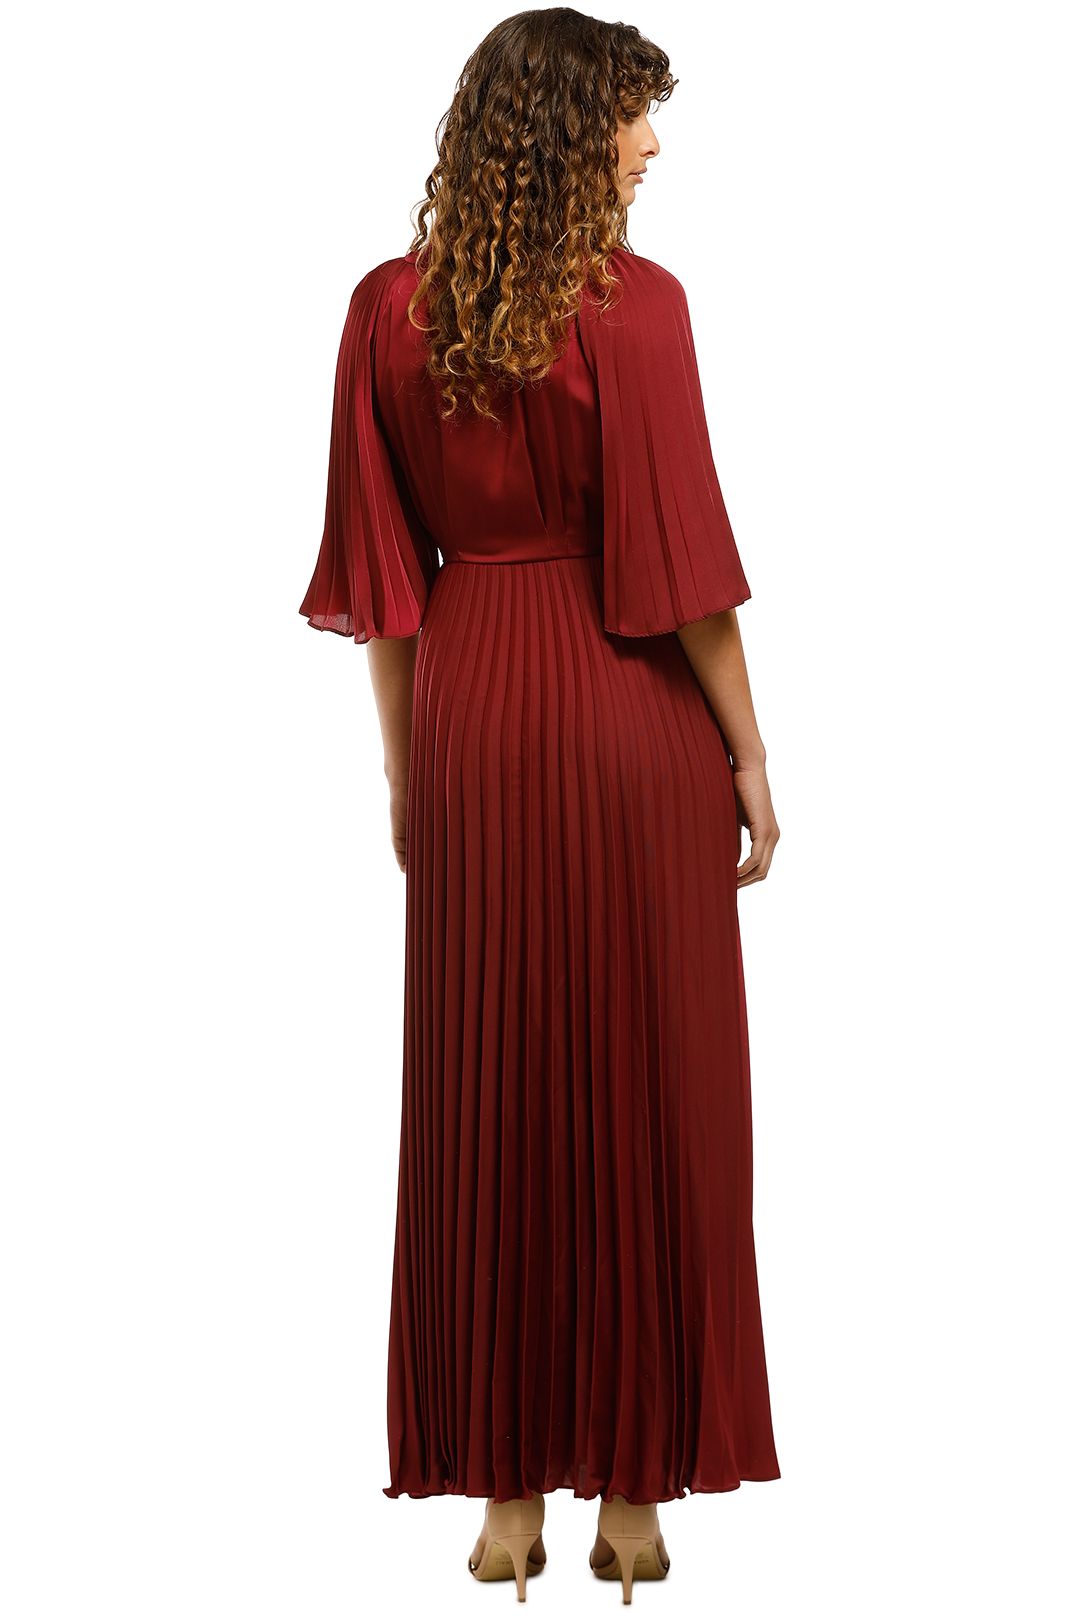 Ginger-and-Smart-Tempera-Wrap-Gown-Burgundy-Back